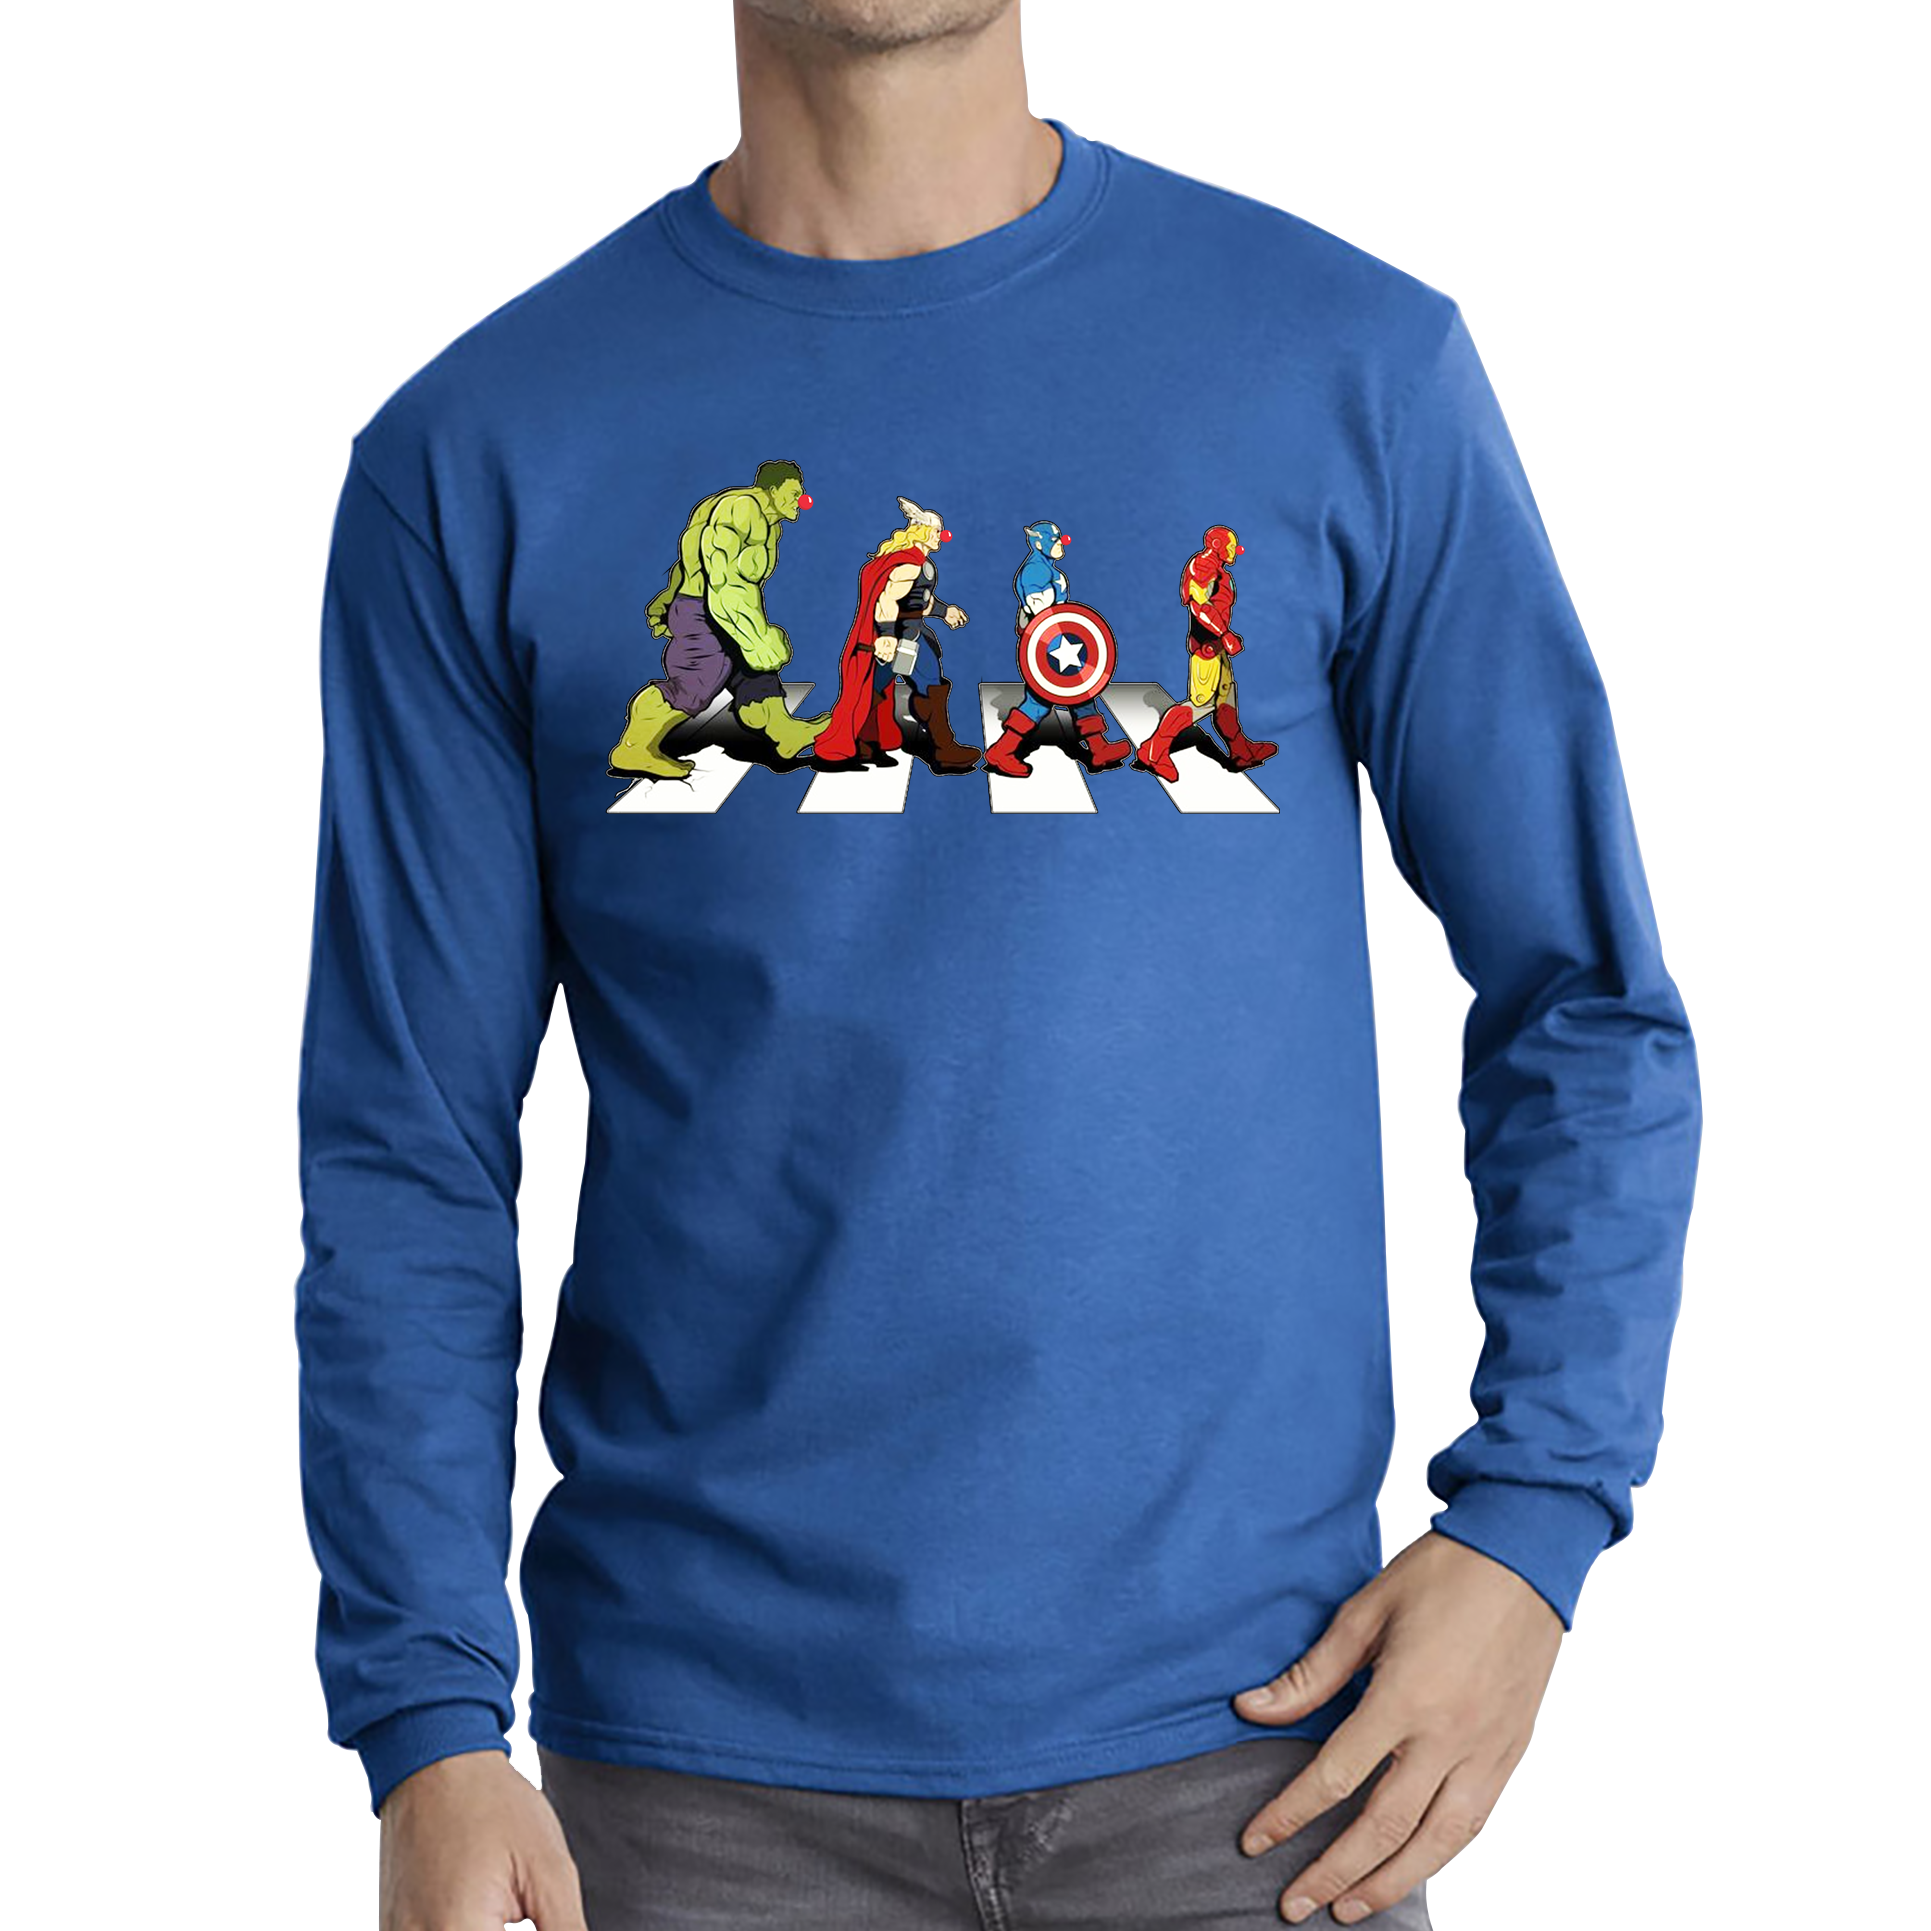 Hulk Thor Captain America Iron Man Marvel Avengers Abbey Road Red Nose Day Adult Long Sleeve T Shirt. 50% Goes To Charity